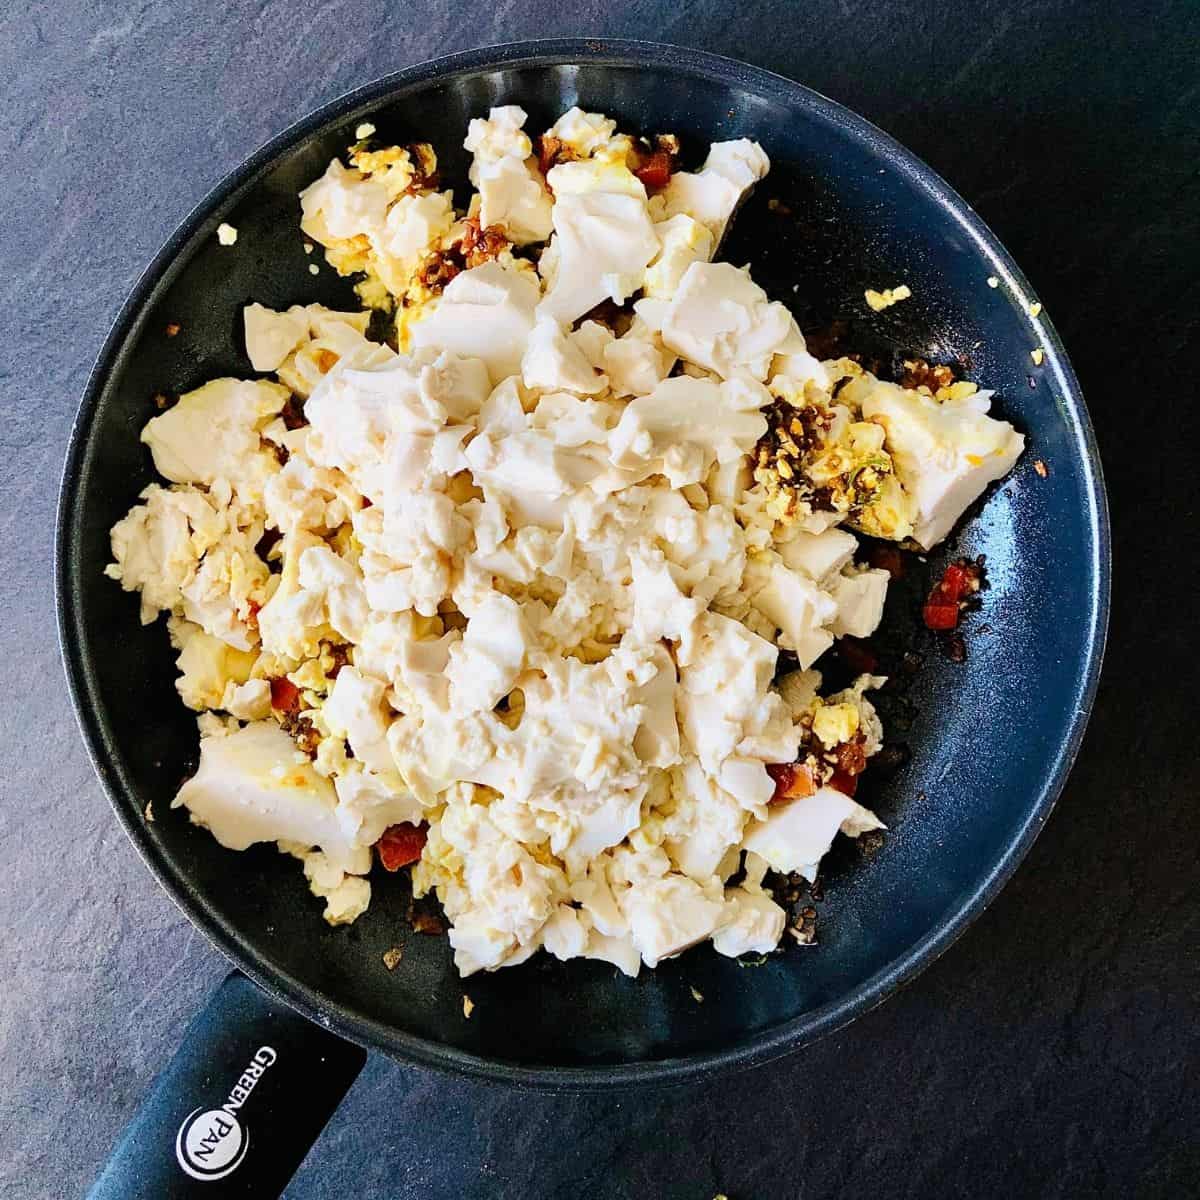 Crumbled tofu added to frying pan containing other cooked ingredients for scrambled tofu